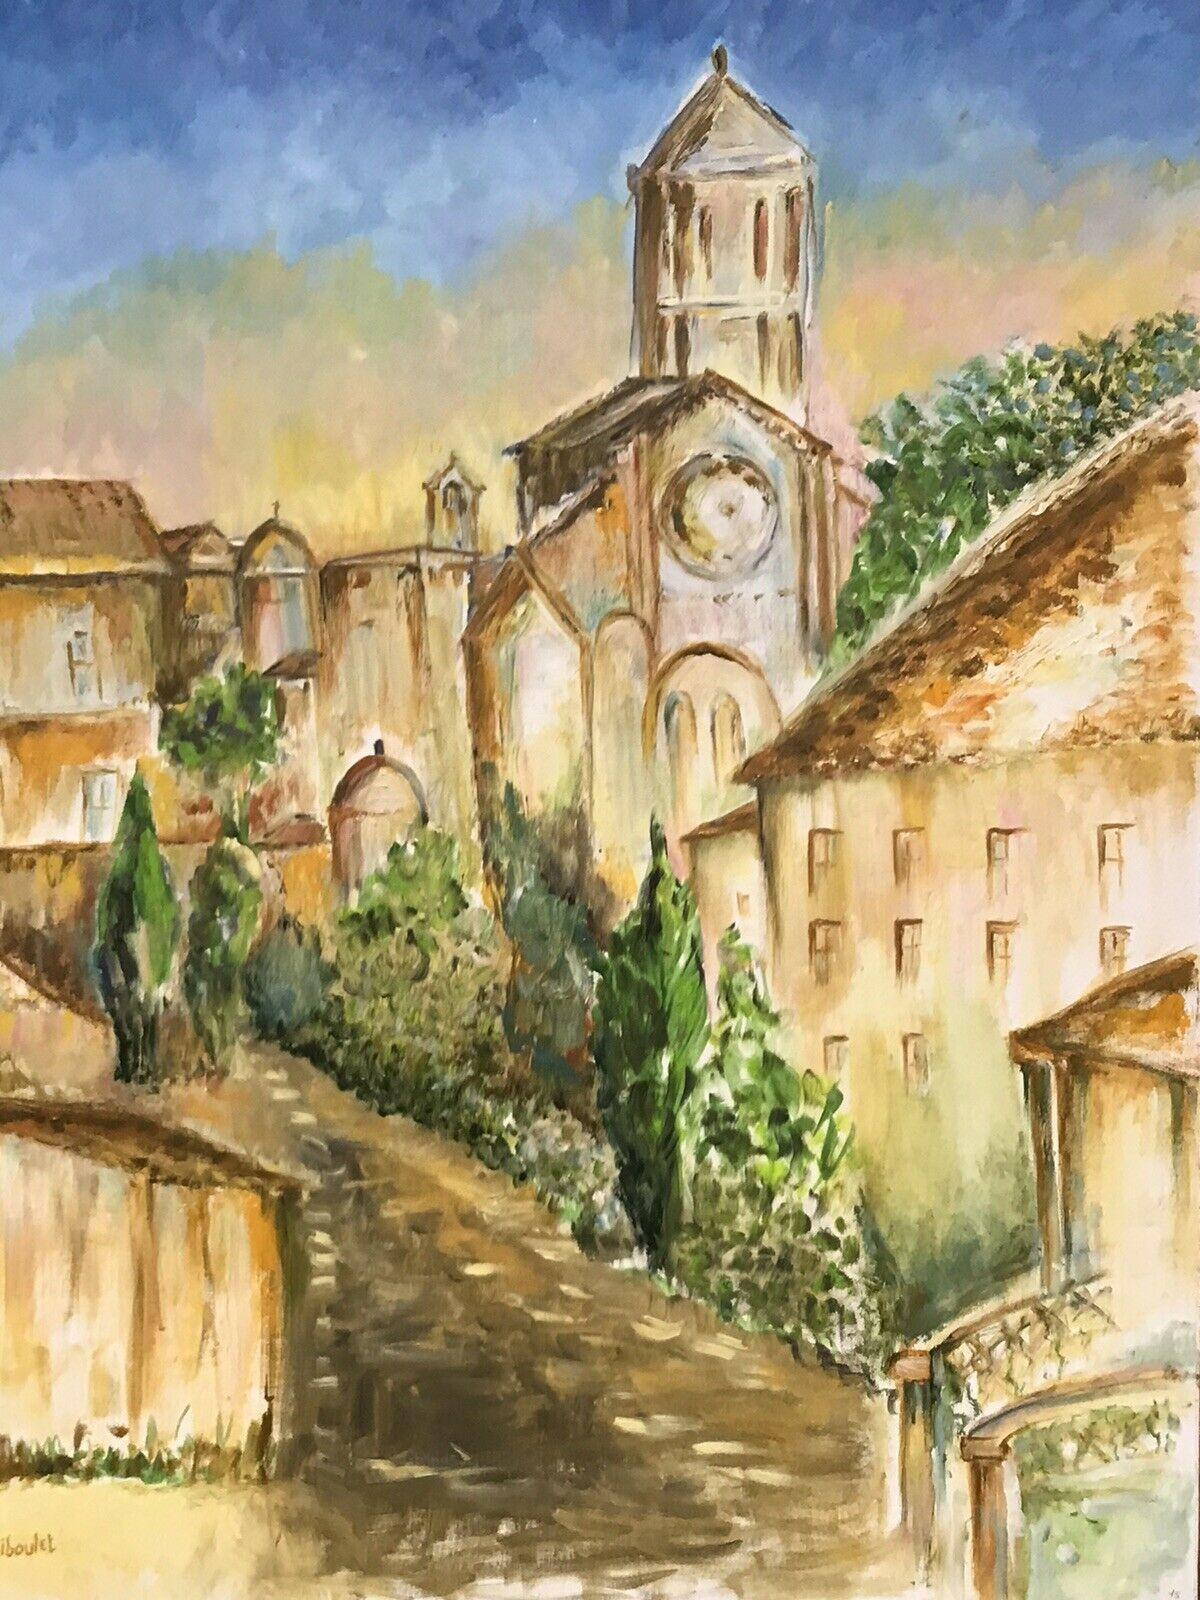 Claudine  Riboulet  Figurative Painting - LARGE SIGNED FRENCH IMPRESSIONIST OIL - UZES TOWN/ PROVENCE in the Gard region